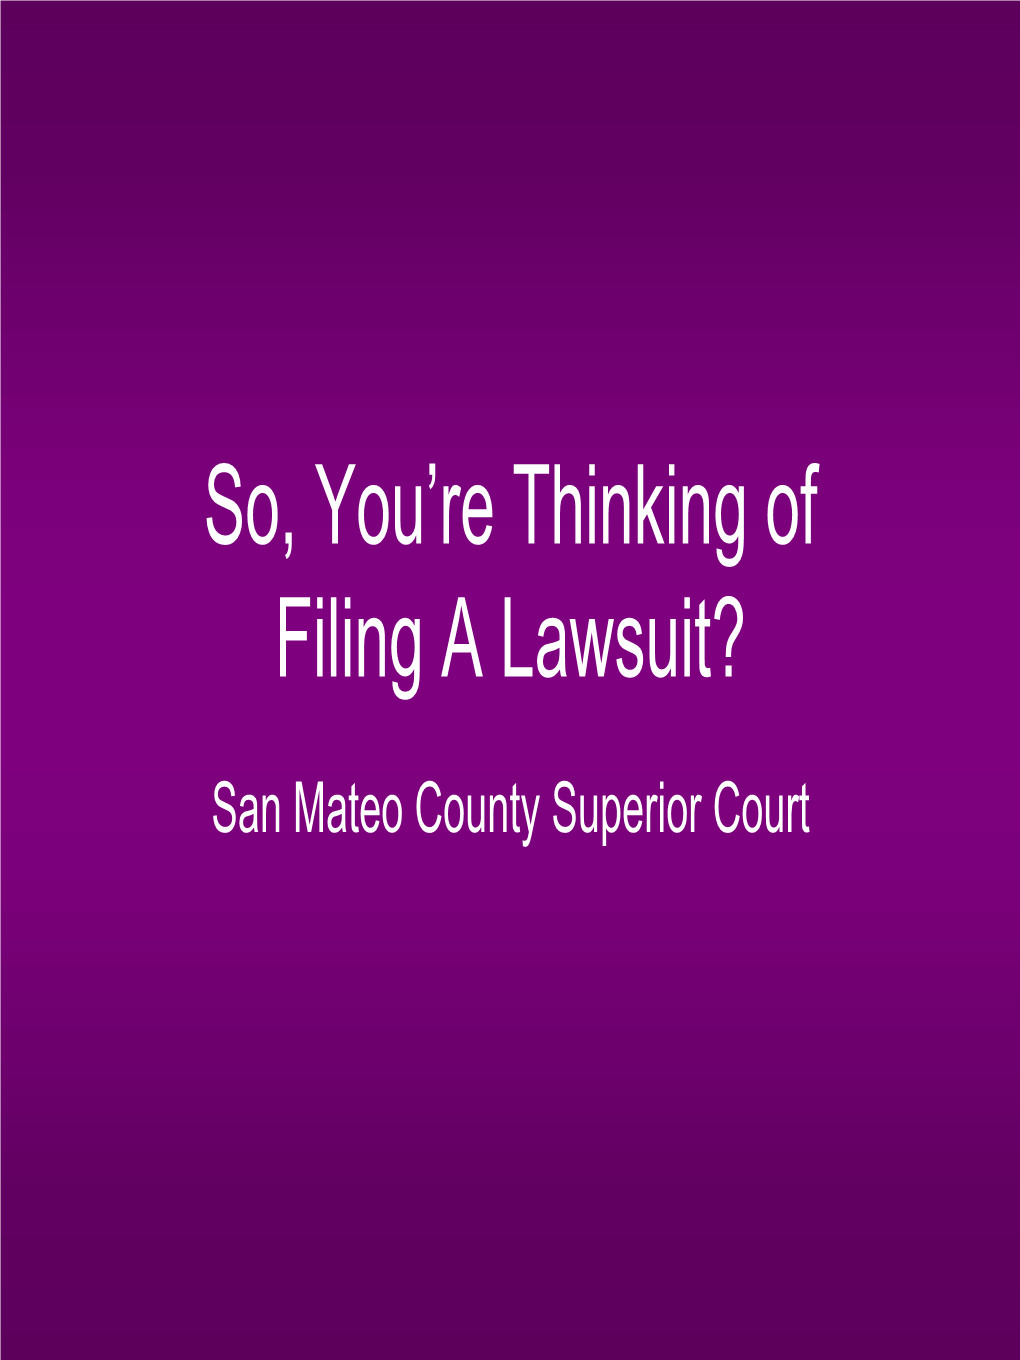 So, You're Thinking of Filing a Lawsuit?